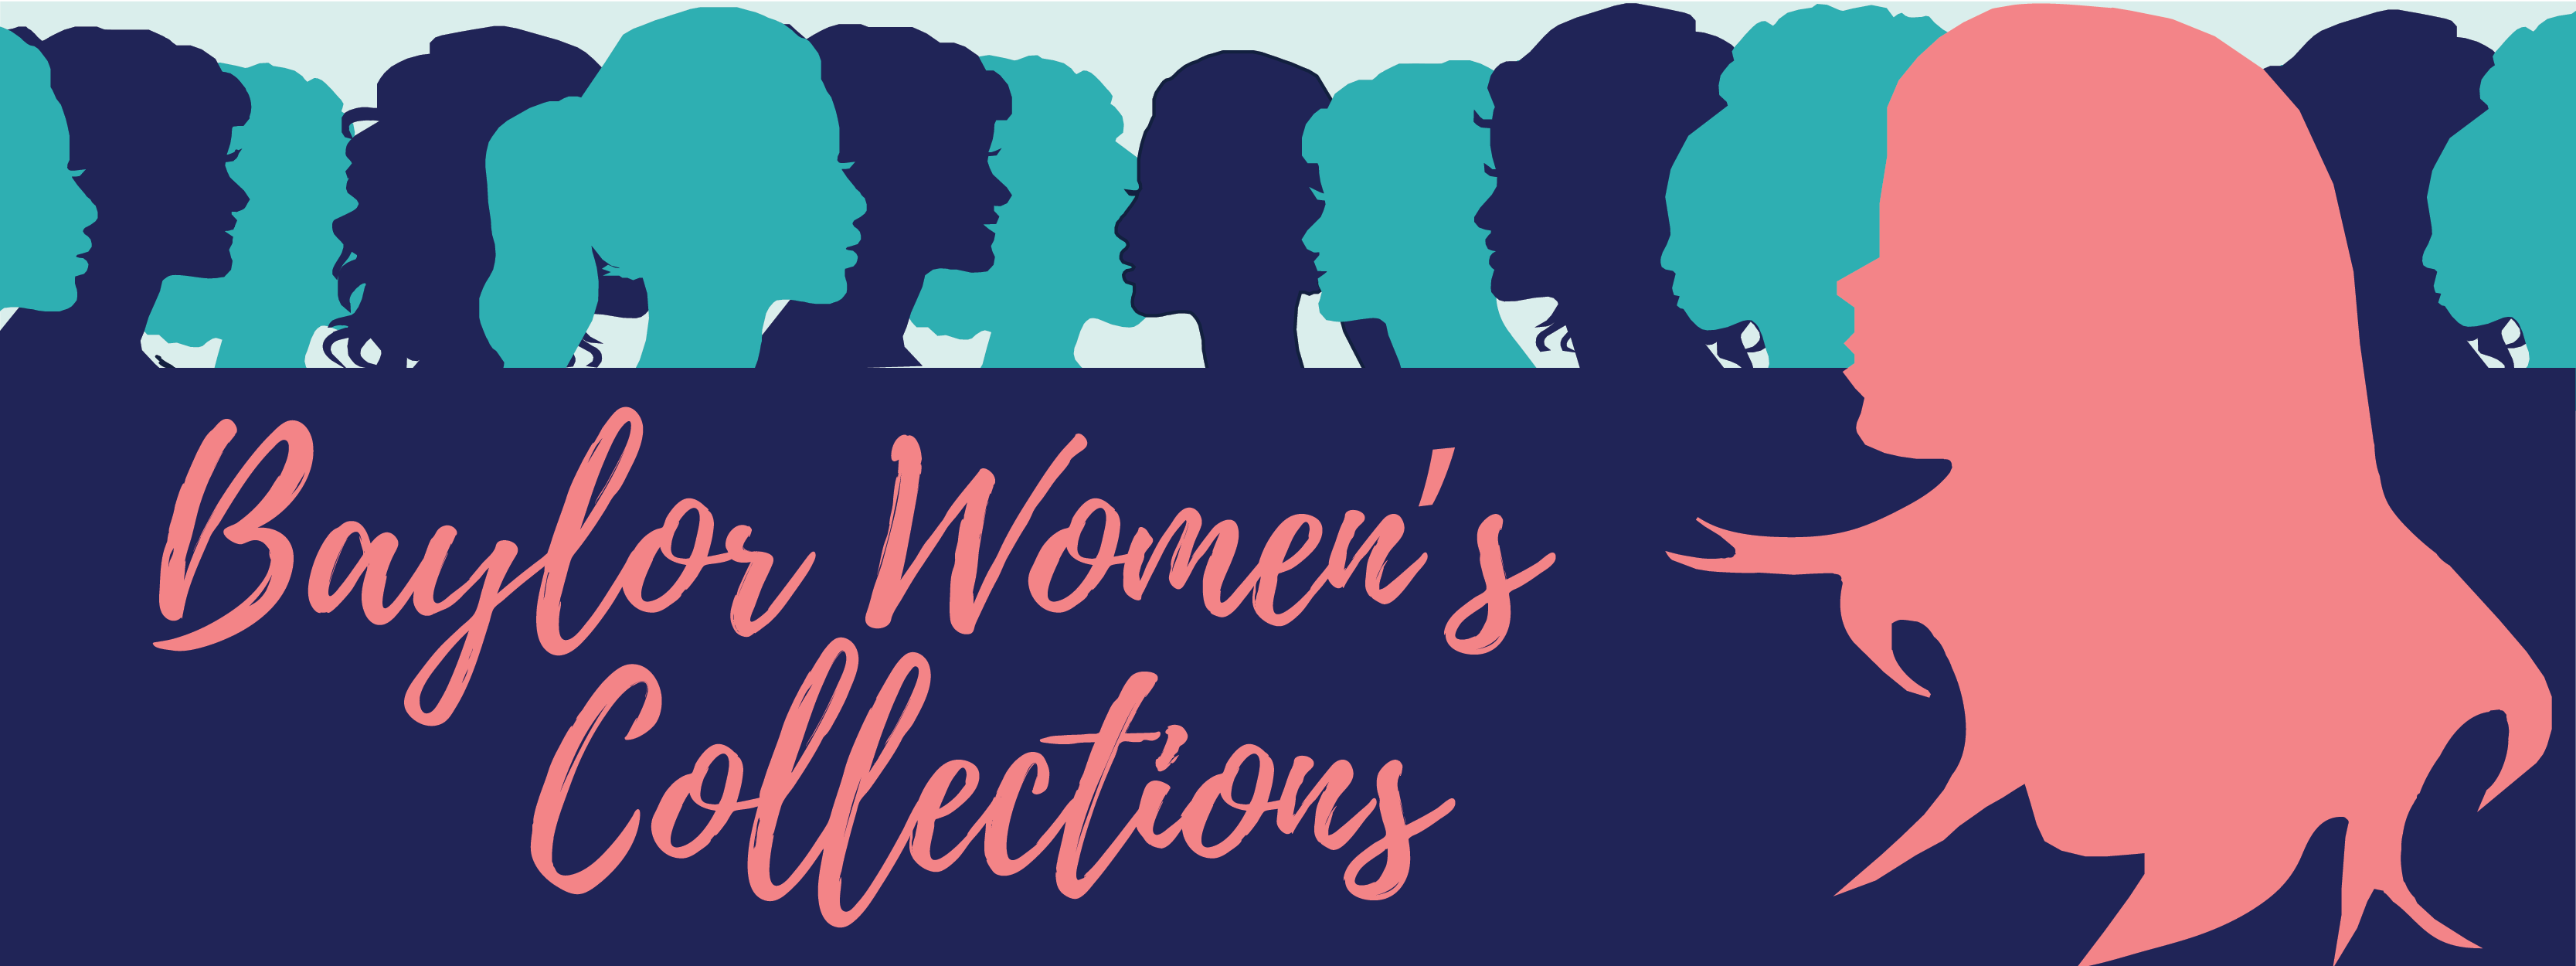 Women's Collections, University Libraries, Museums, and the Press